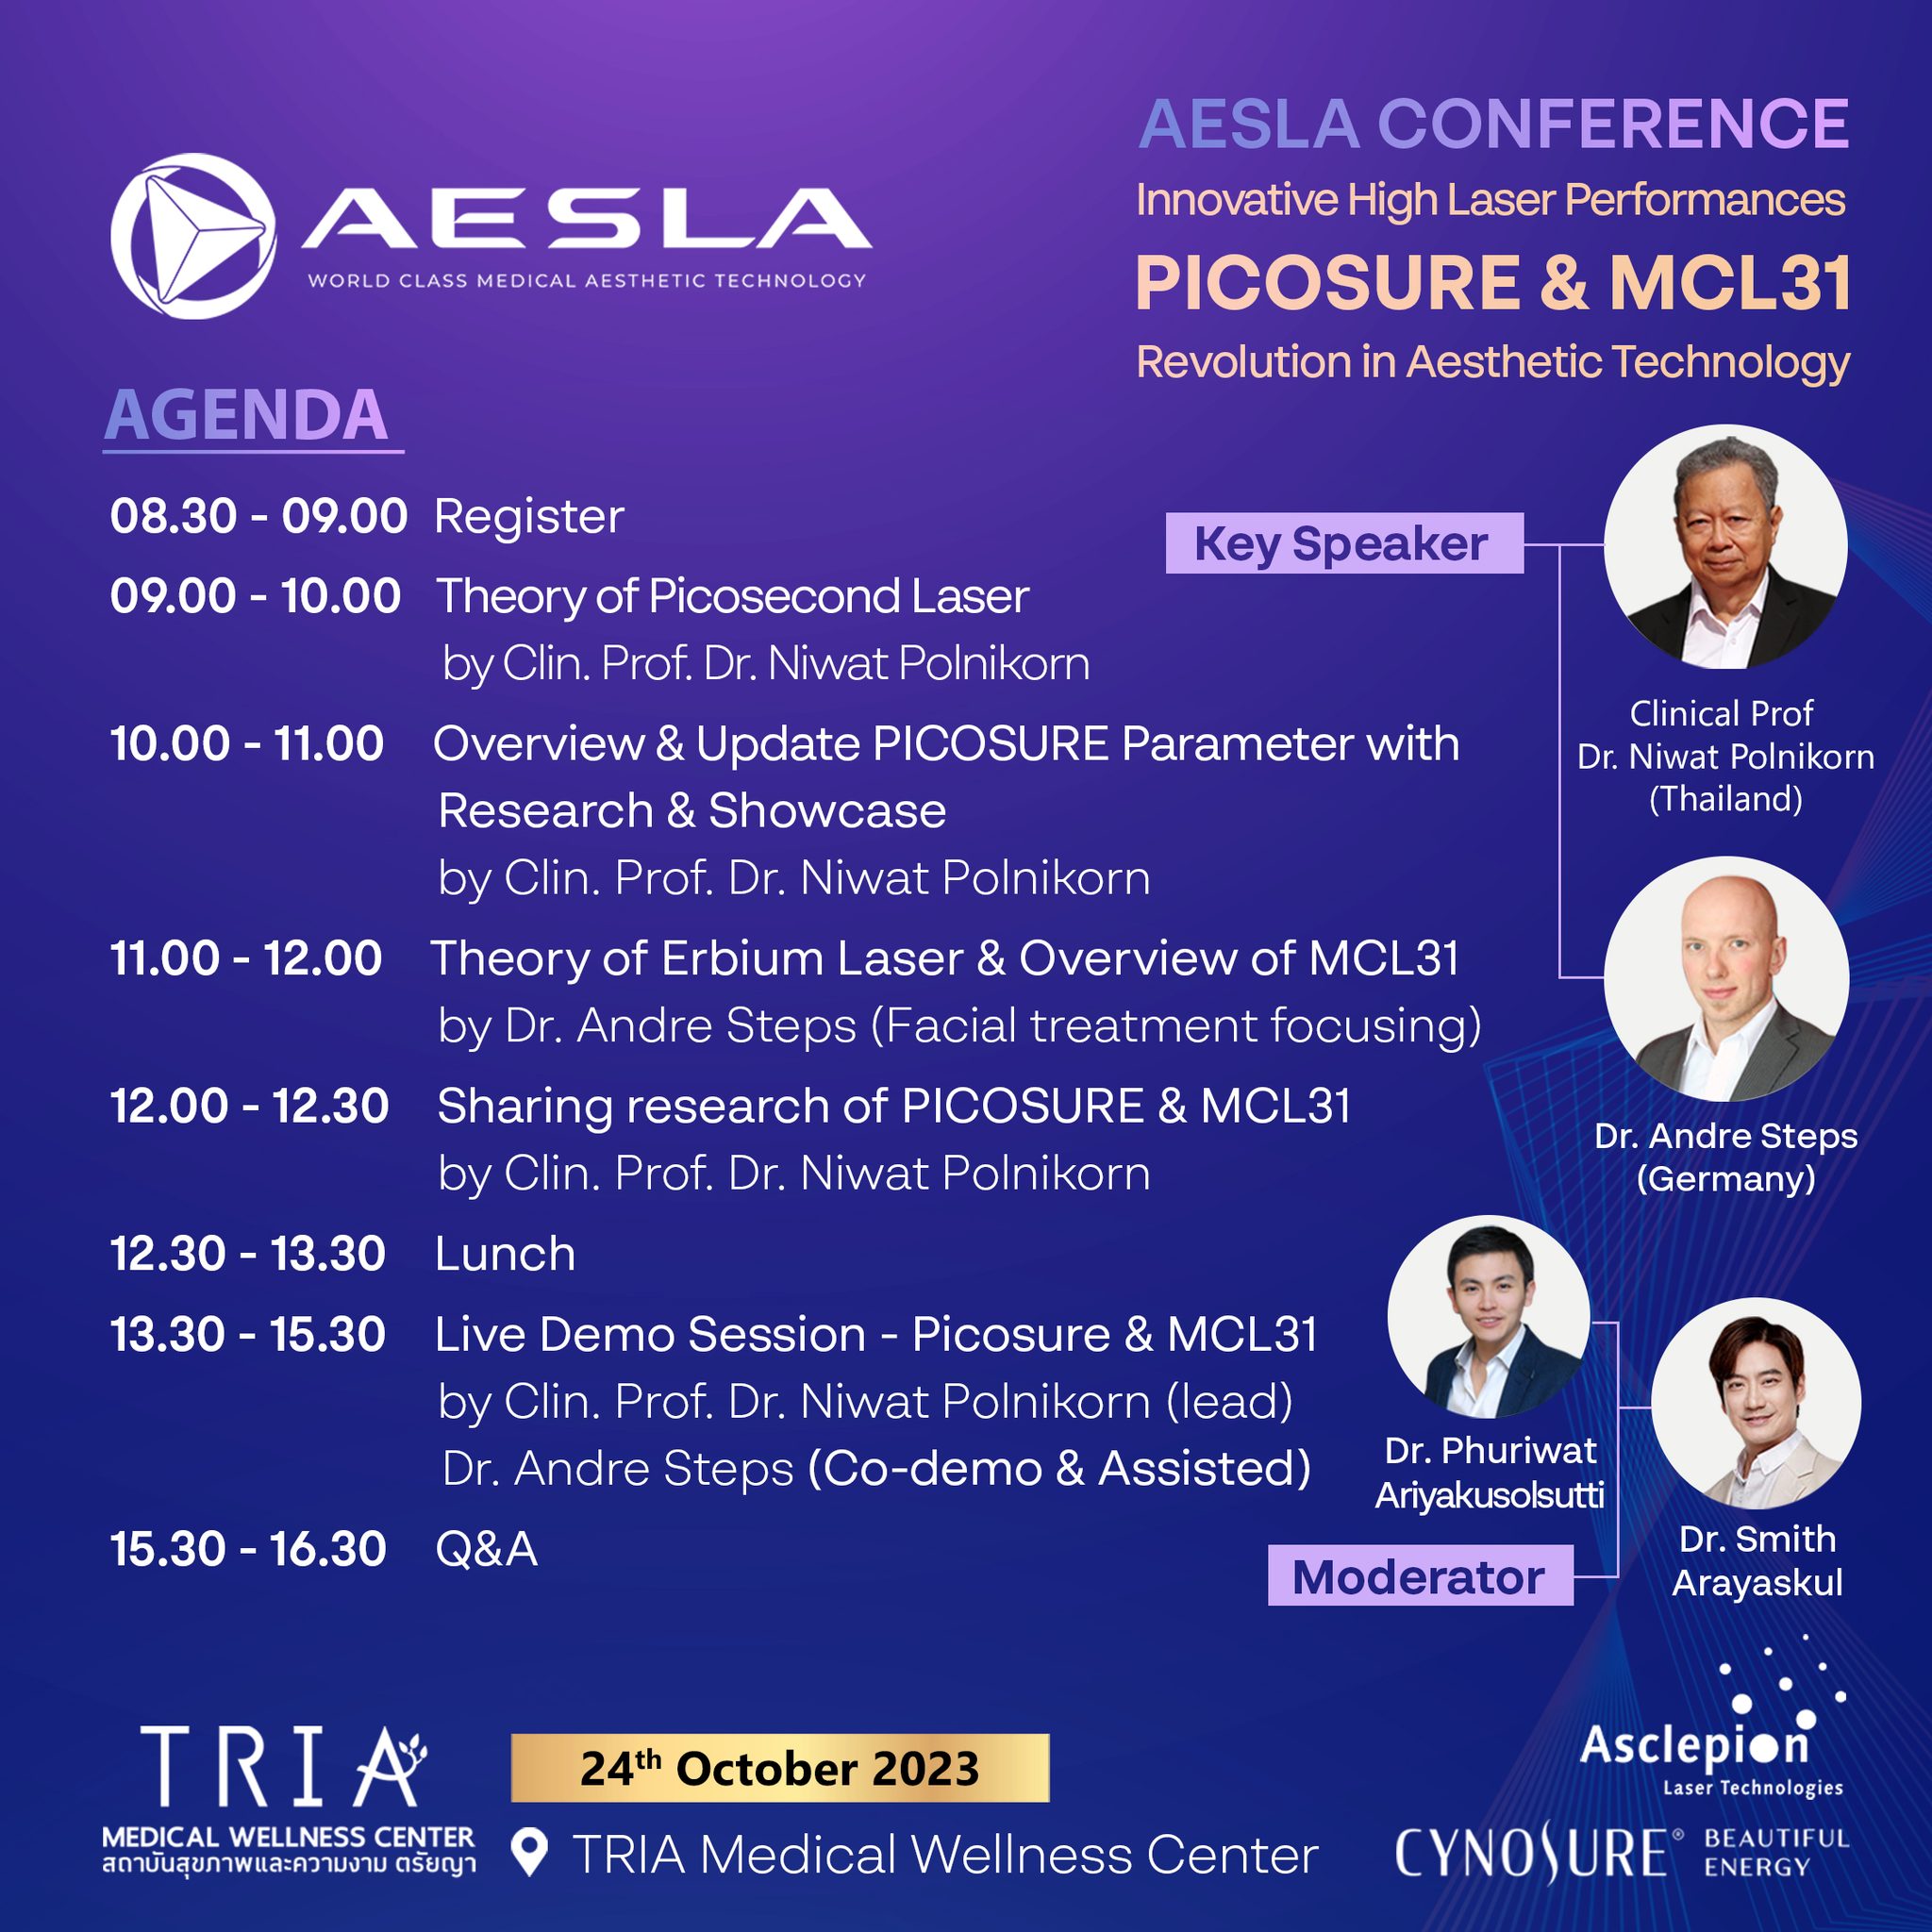 AESSLA Conference at TRIA Medical Wellness Center